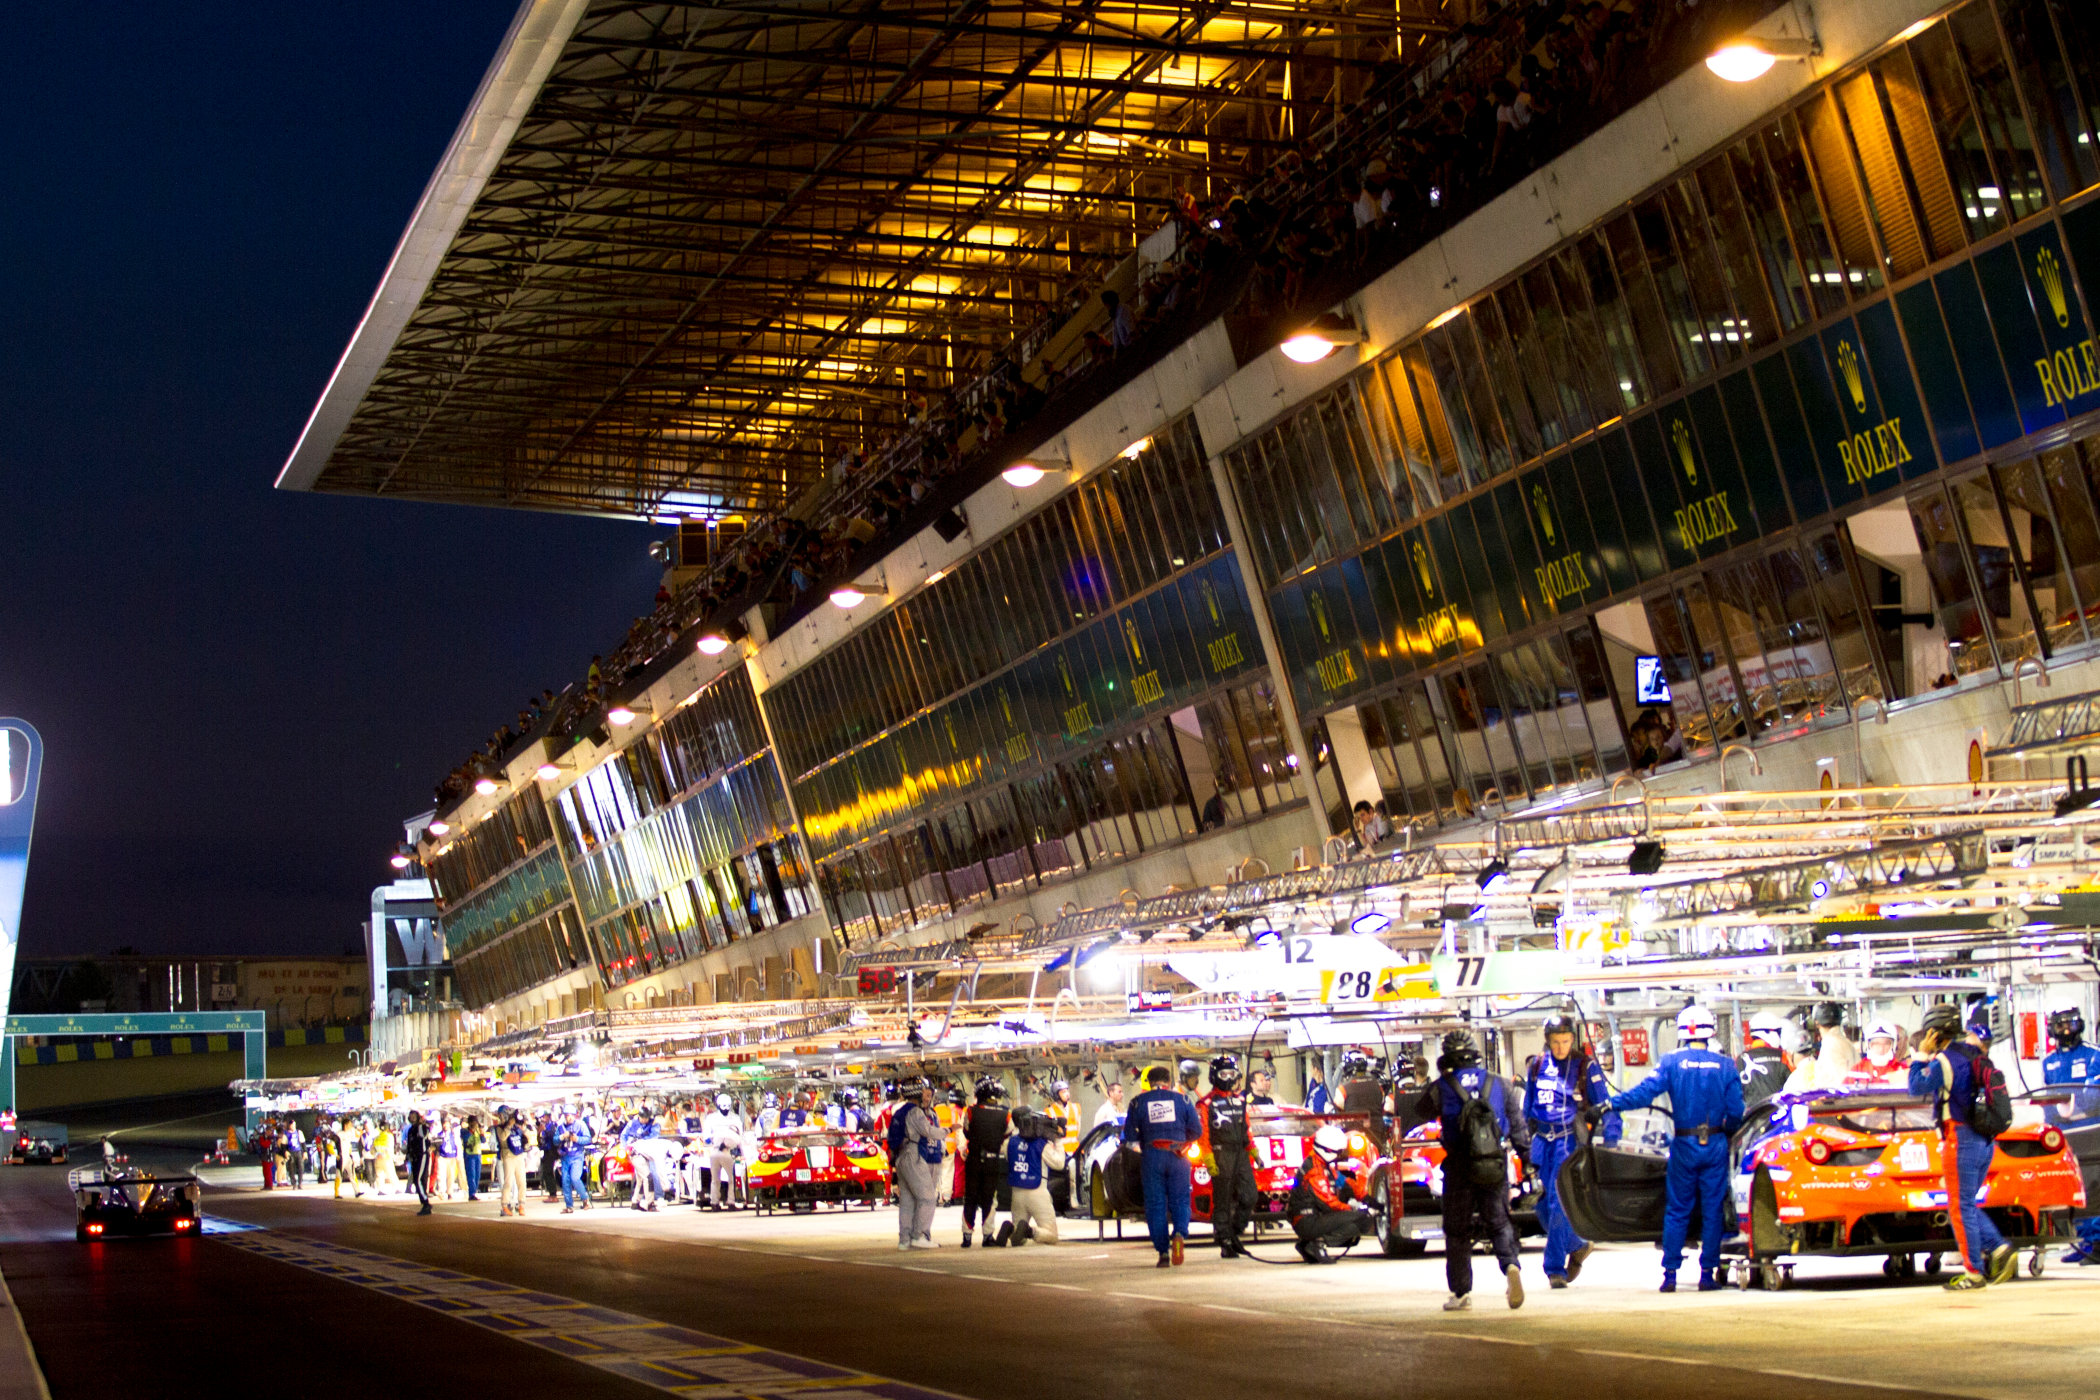 Night in the pit lane at the 24 Heures du Mans 2014